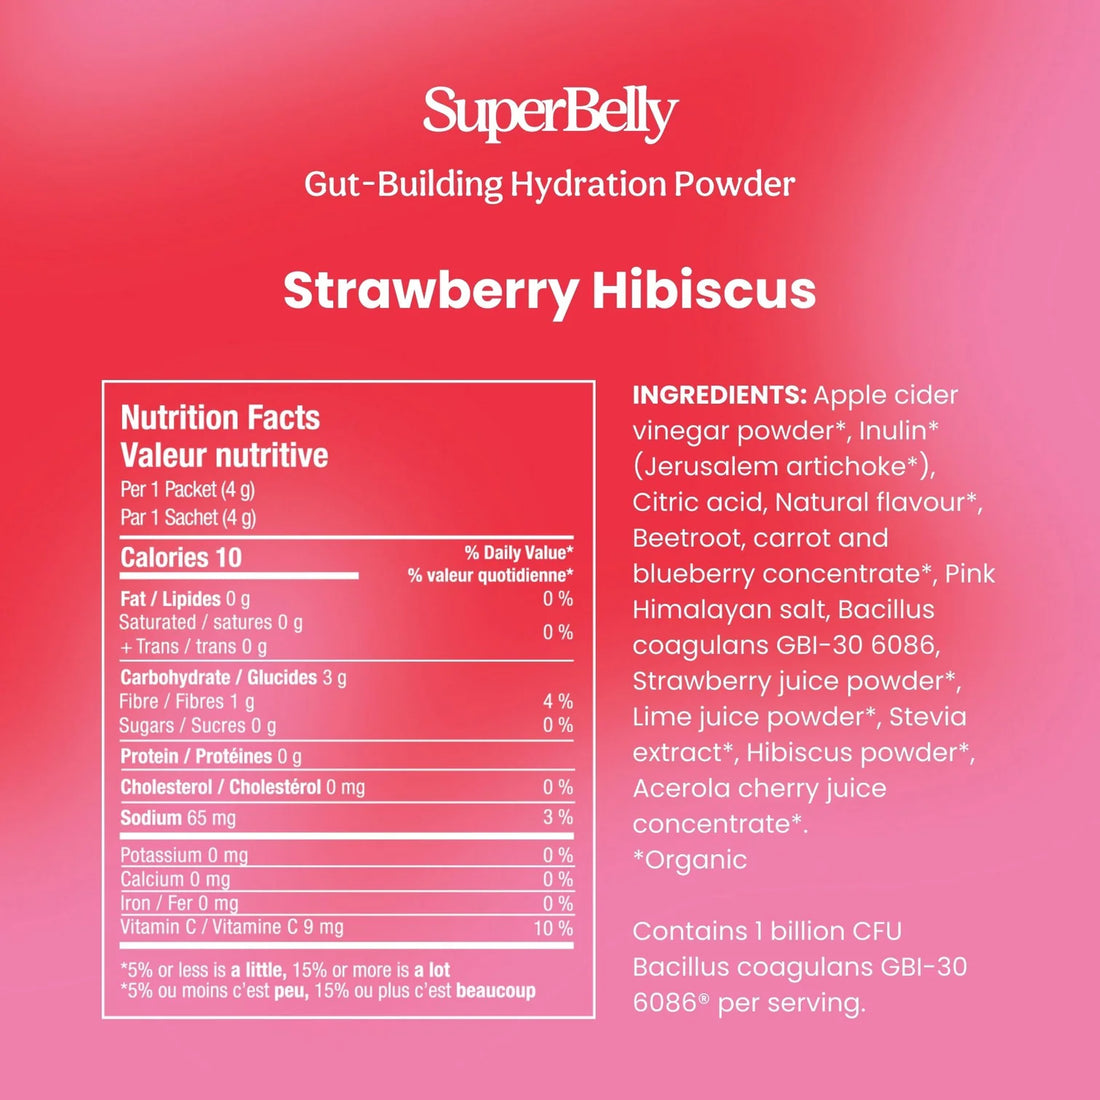 Blume - Superbelly (Strawberry Hibiscus)